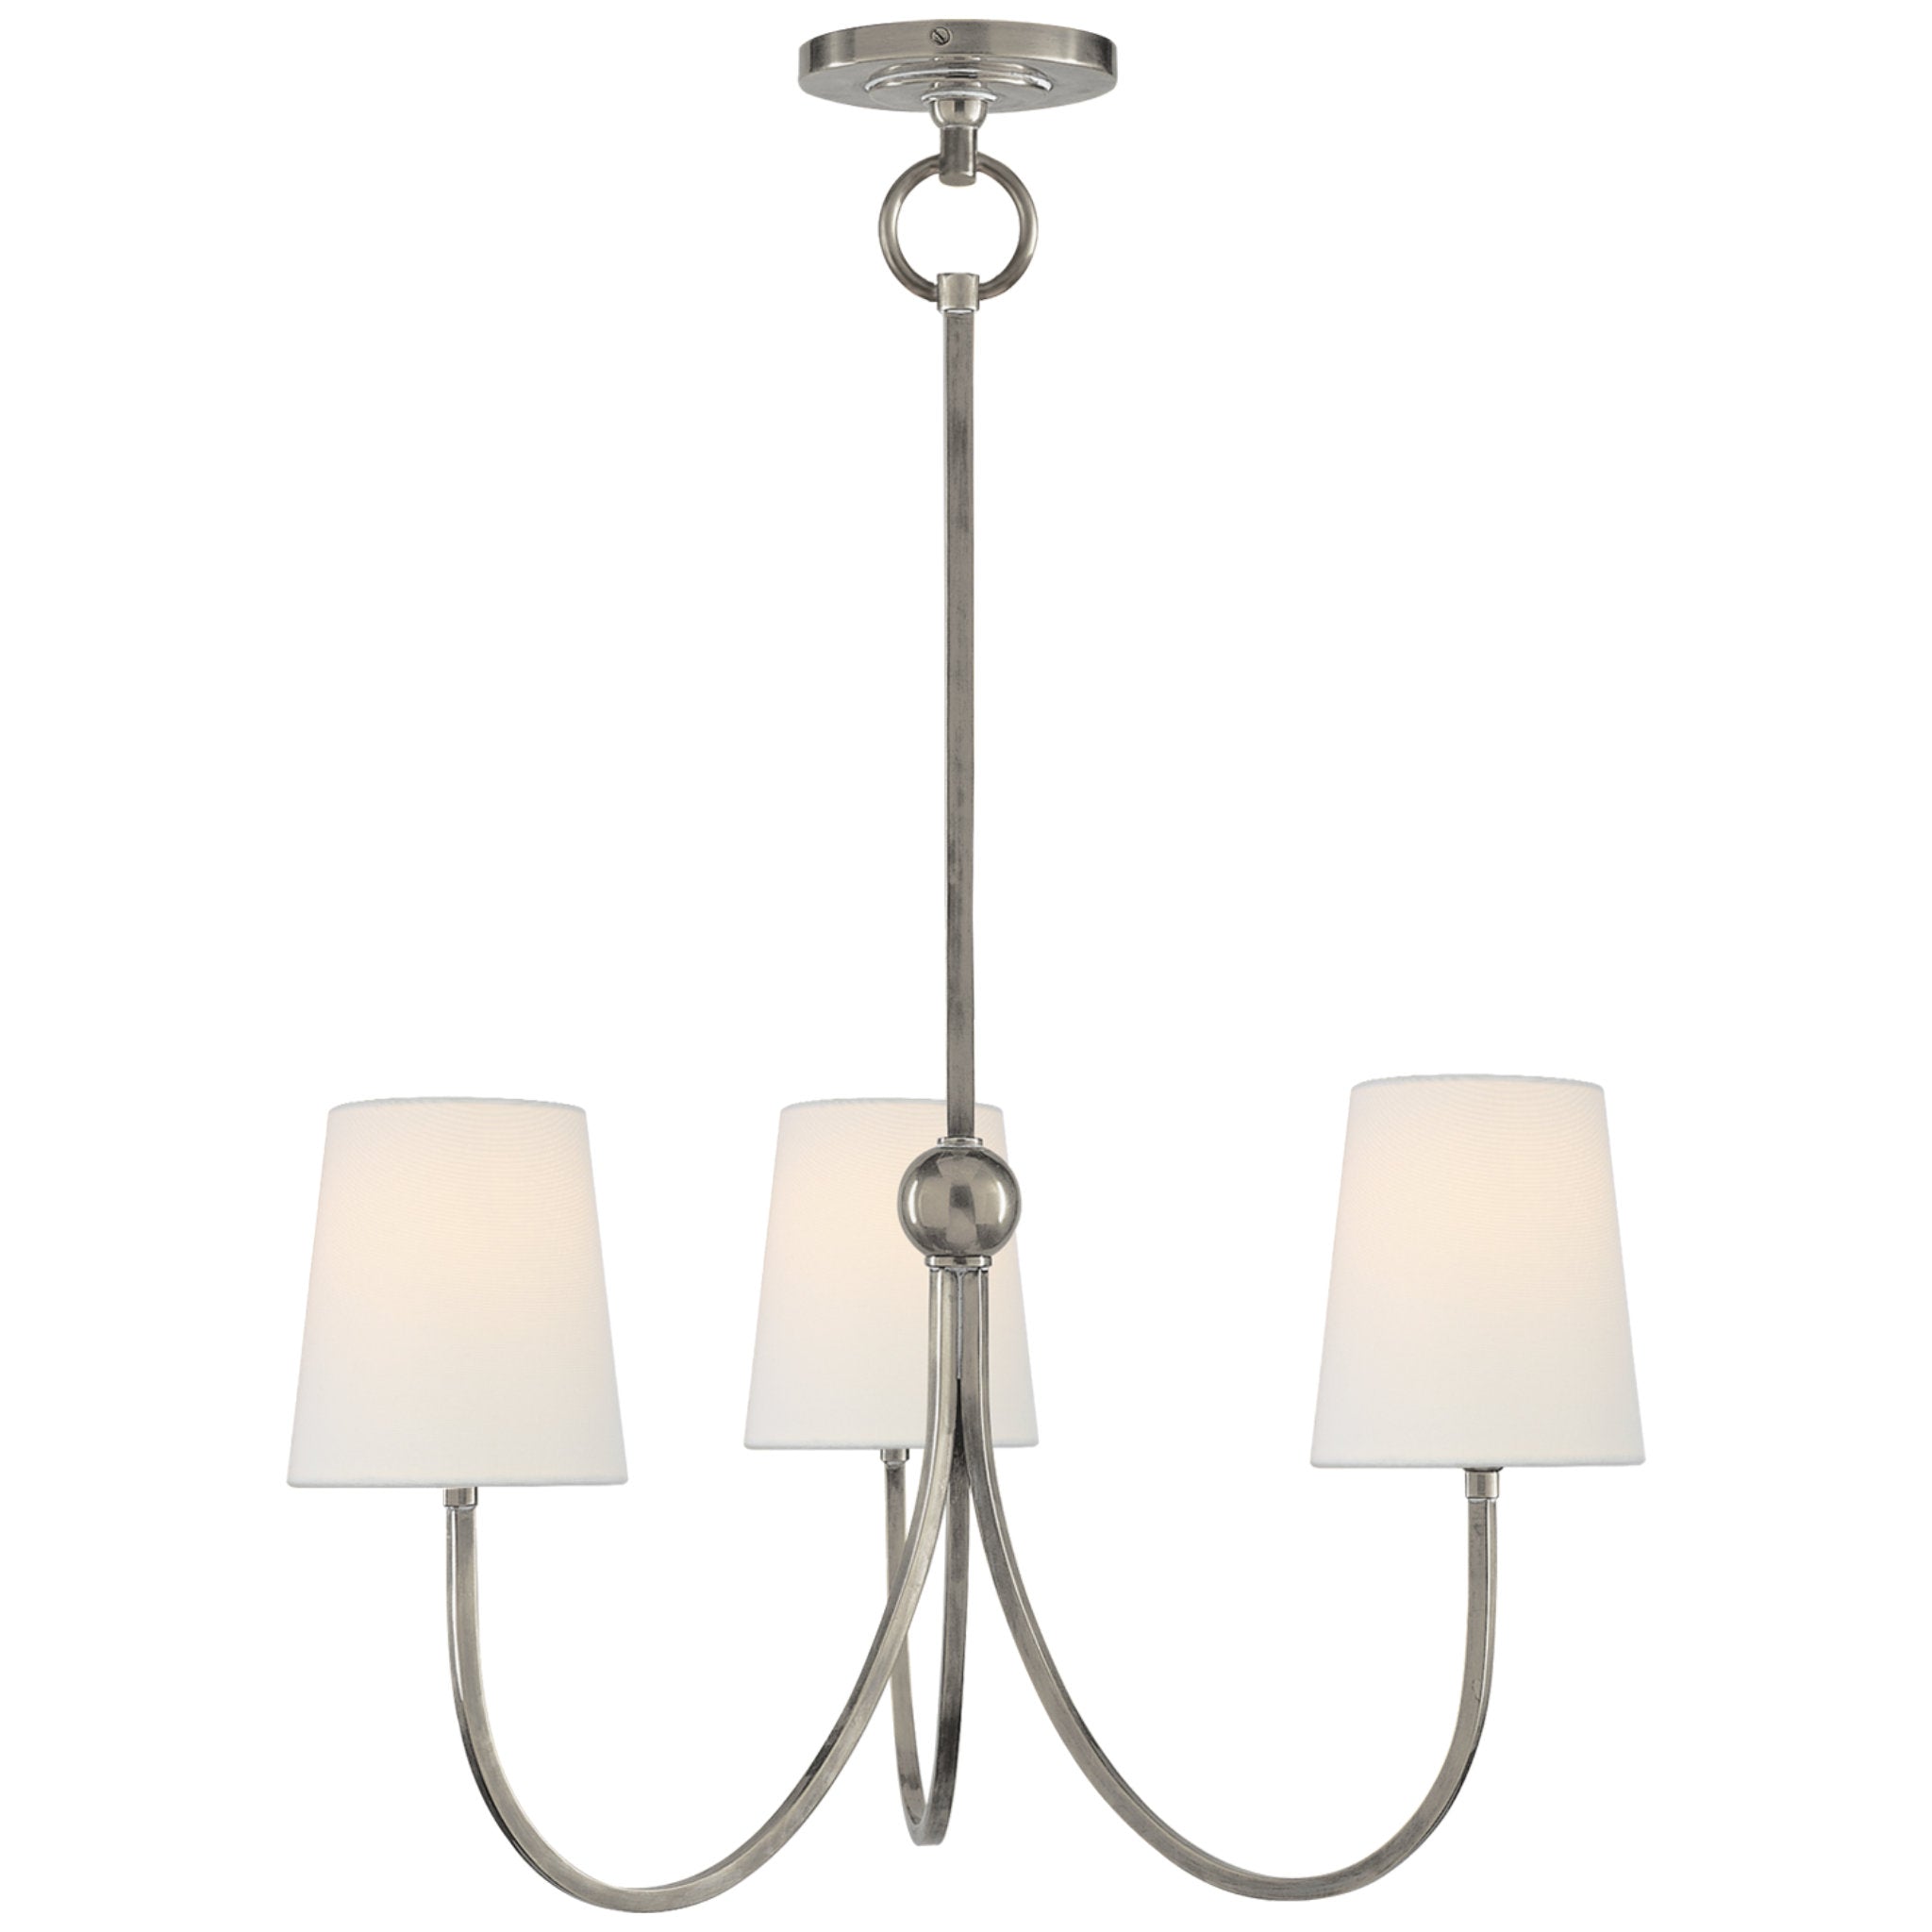 Thomas O'Brien Reed Small Chandelier in Antique Nickel with Linen Shades